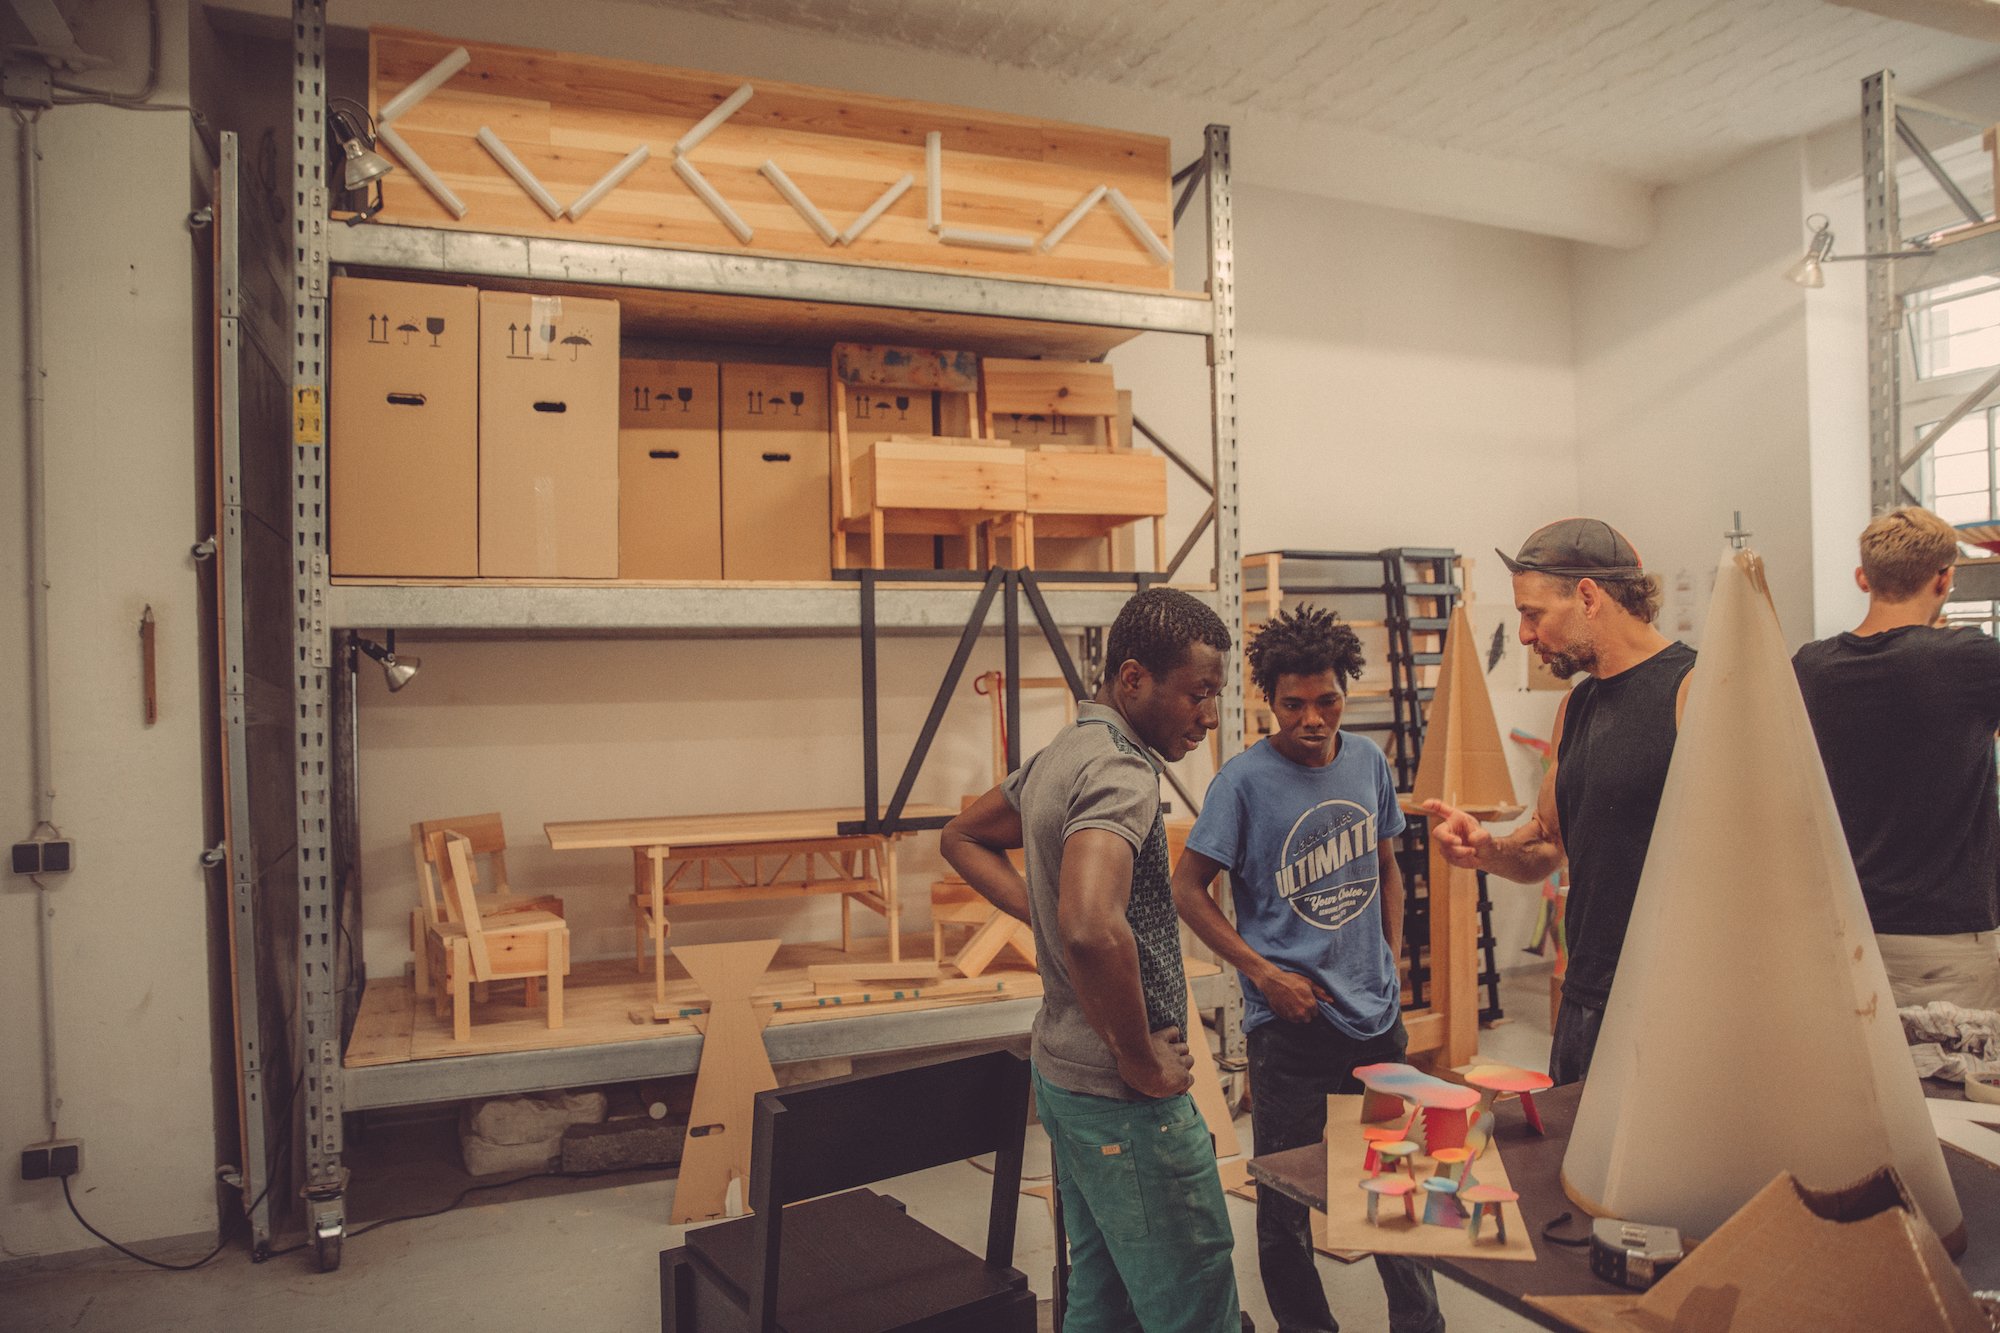  Yousuf Karim, Malik Agachi and Jerszy Seymour discussing the next steps in the workshop. In the background, Constantin Dichtl works with mockups, cardboard shapes and moulding forms. 